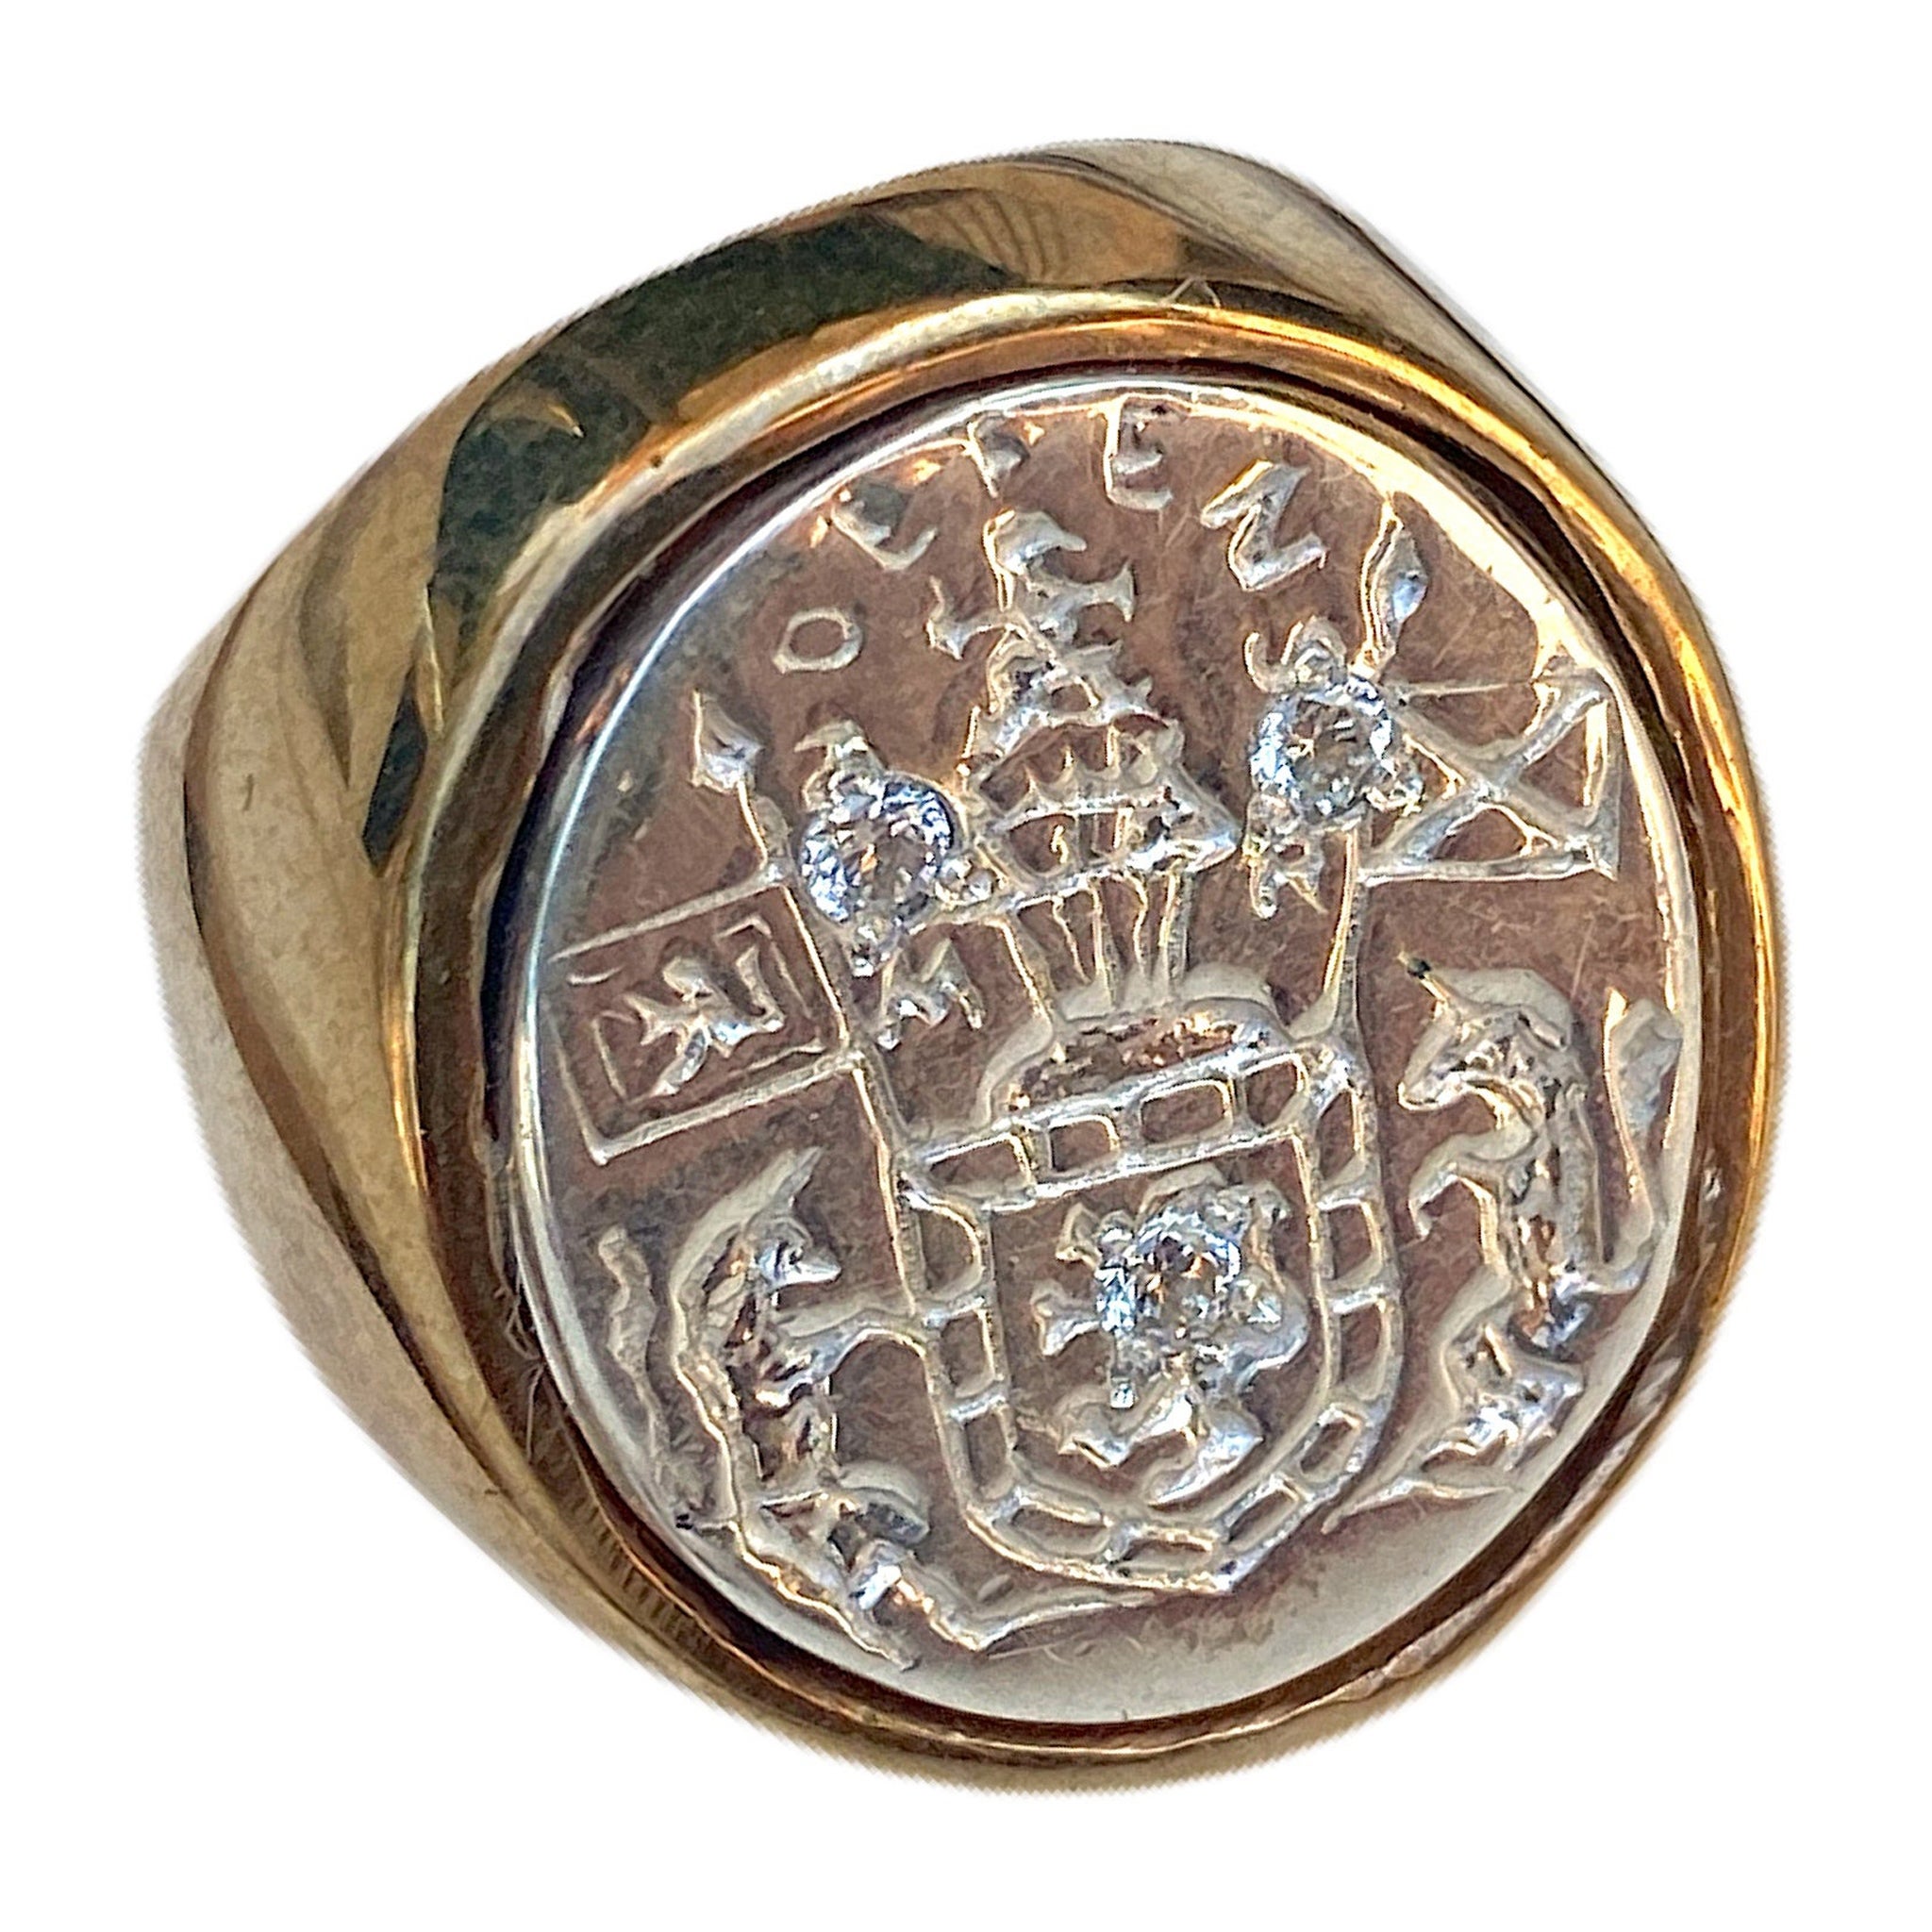 Sapphire Crest Signet Ring Sterling Silver Bronze Unisex J Dauphin For Sale